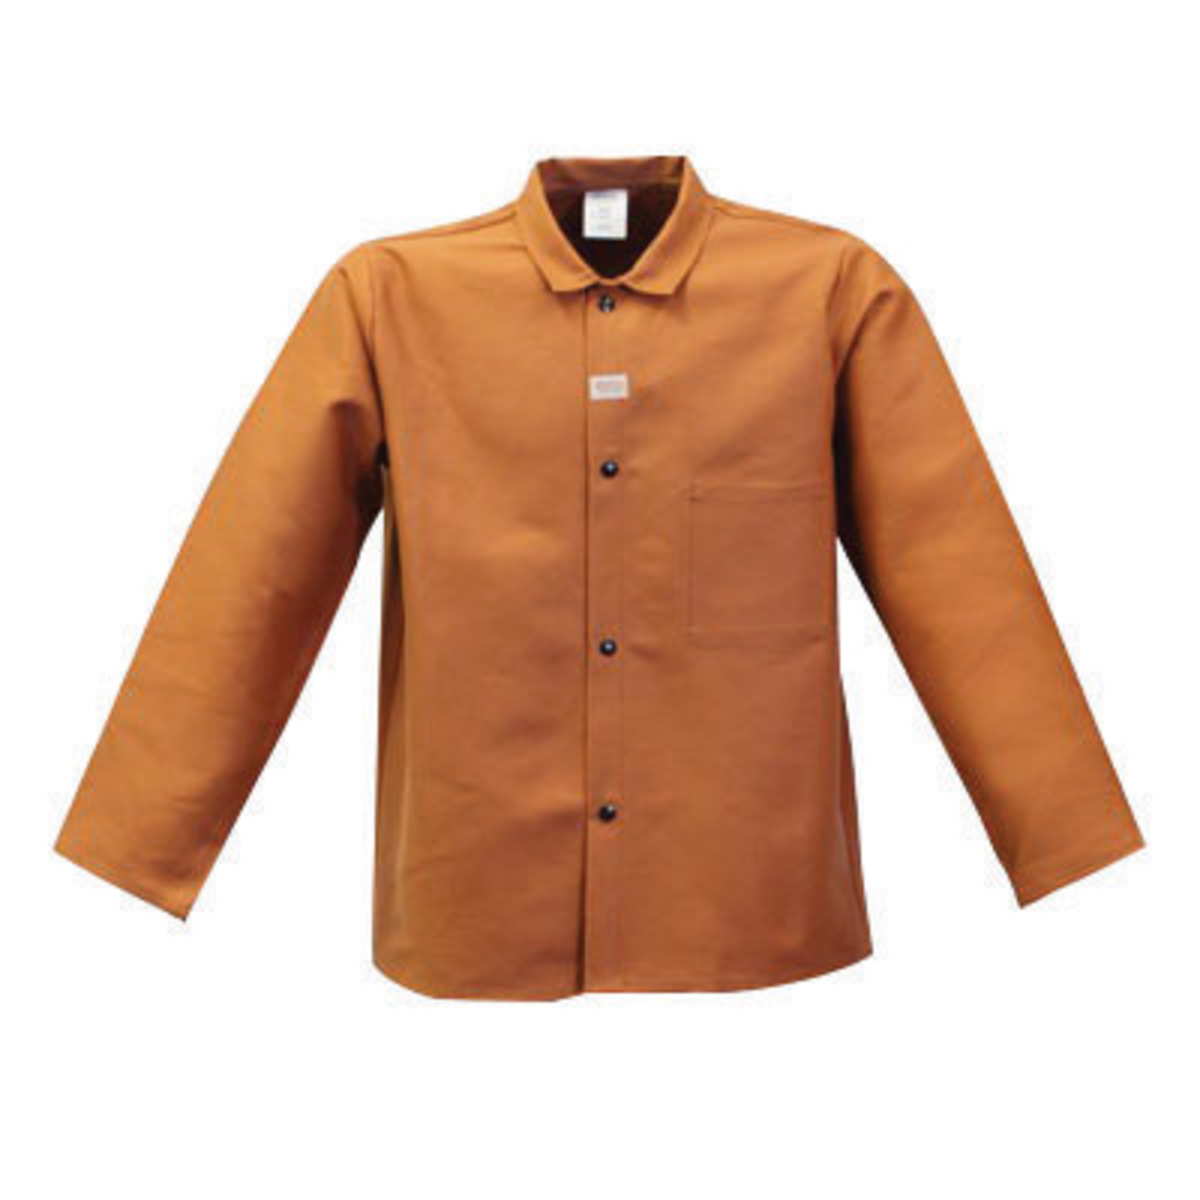 Stanco Safety Products™ Medium Rust Brown Cotton Flame Resistant Welding Jacket With Snap Closure